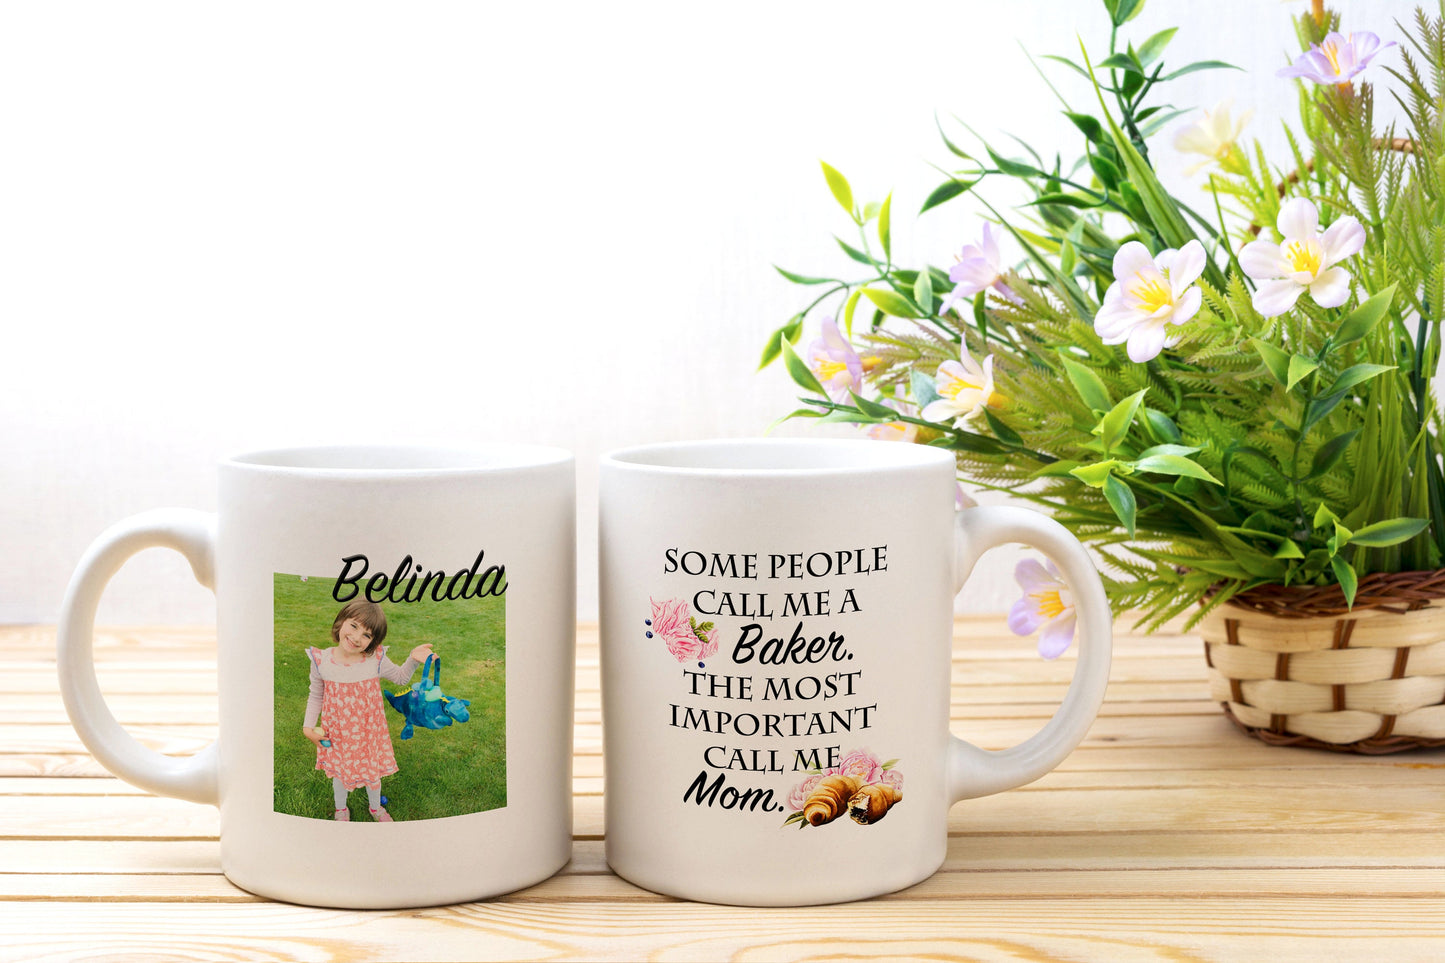 Custom Coffee Mug for Friends Inspirational Quotes - Best Friends Gift Ideas with Names - Busybee Creates